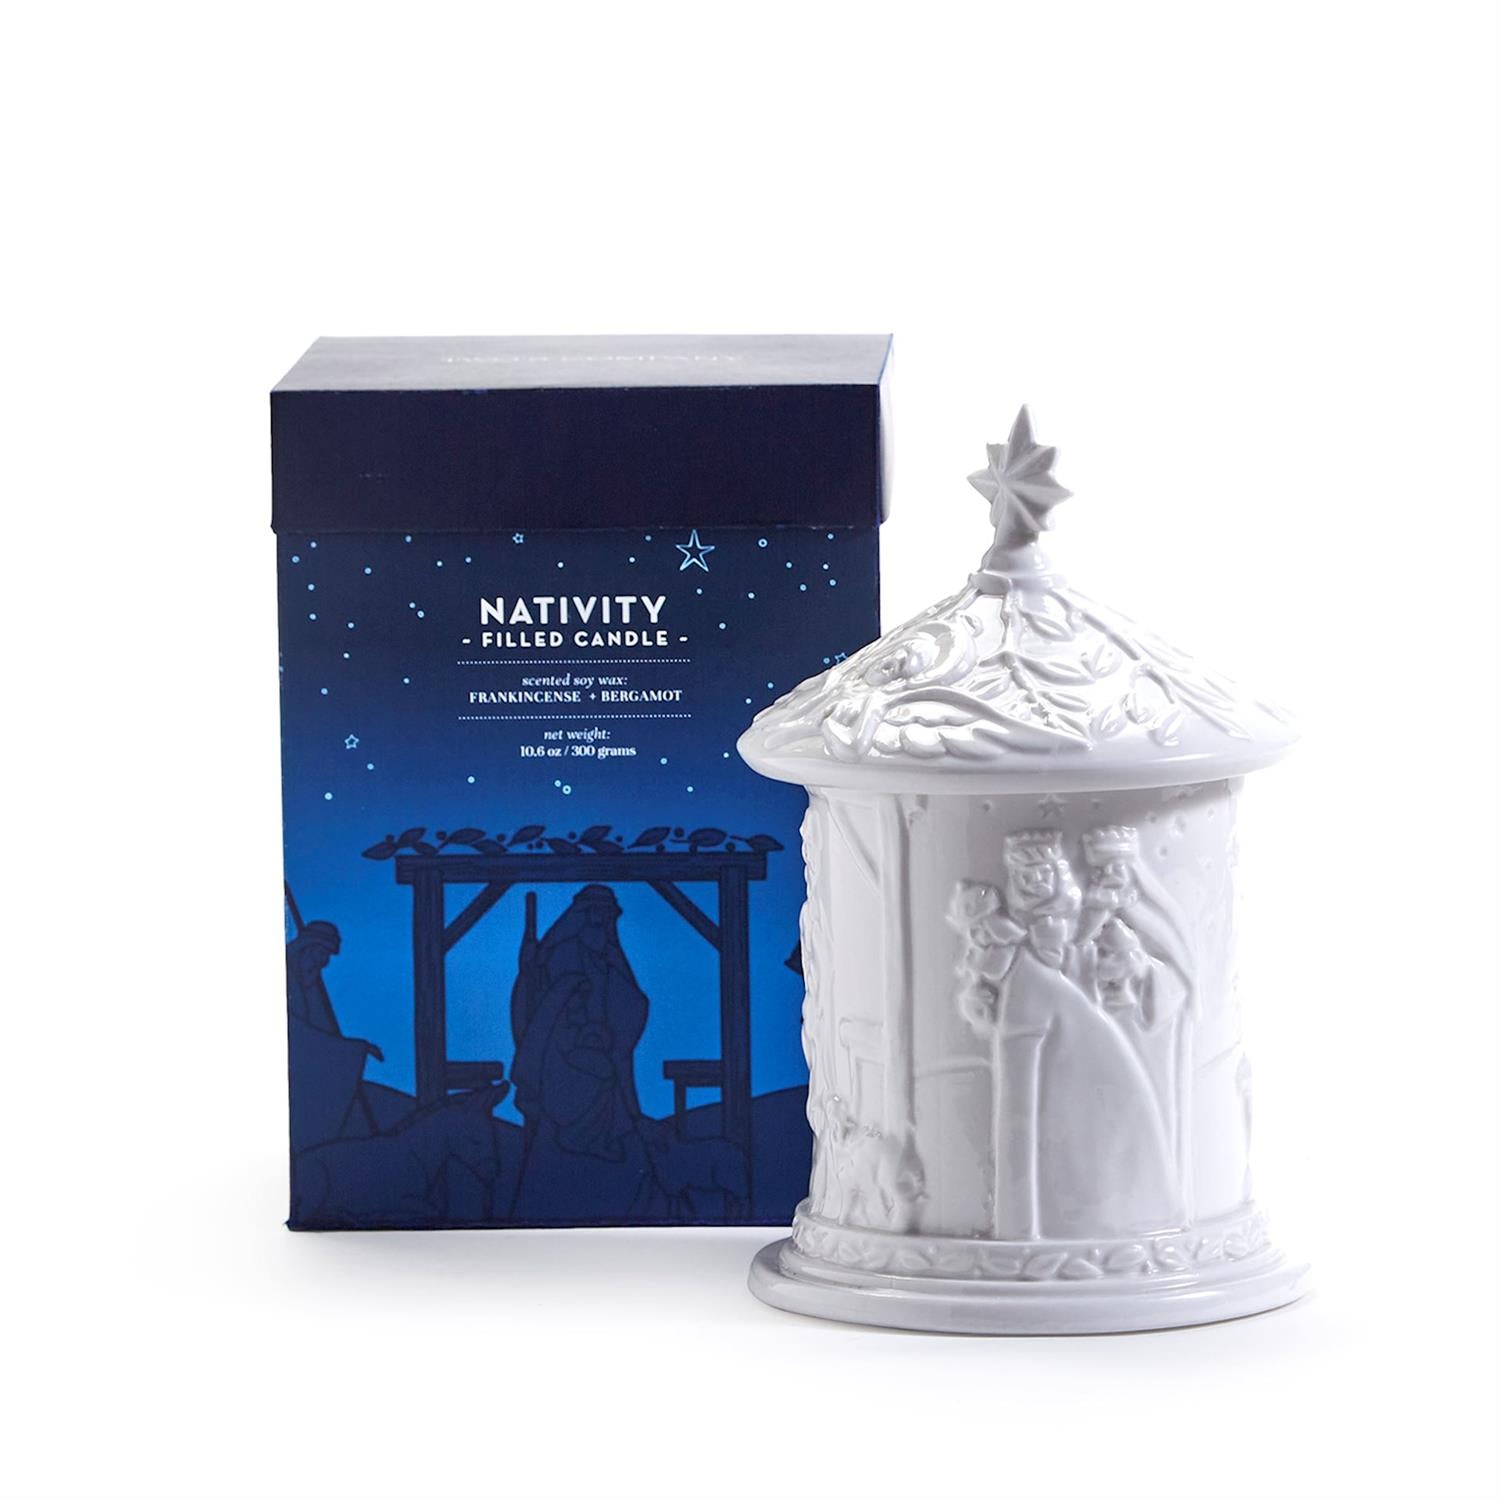 Nativity Lidded Jar Filled with Frankincense-Bergamot Scent Wax in Gift Box